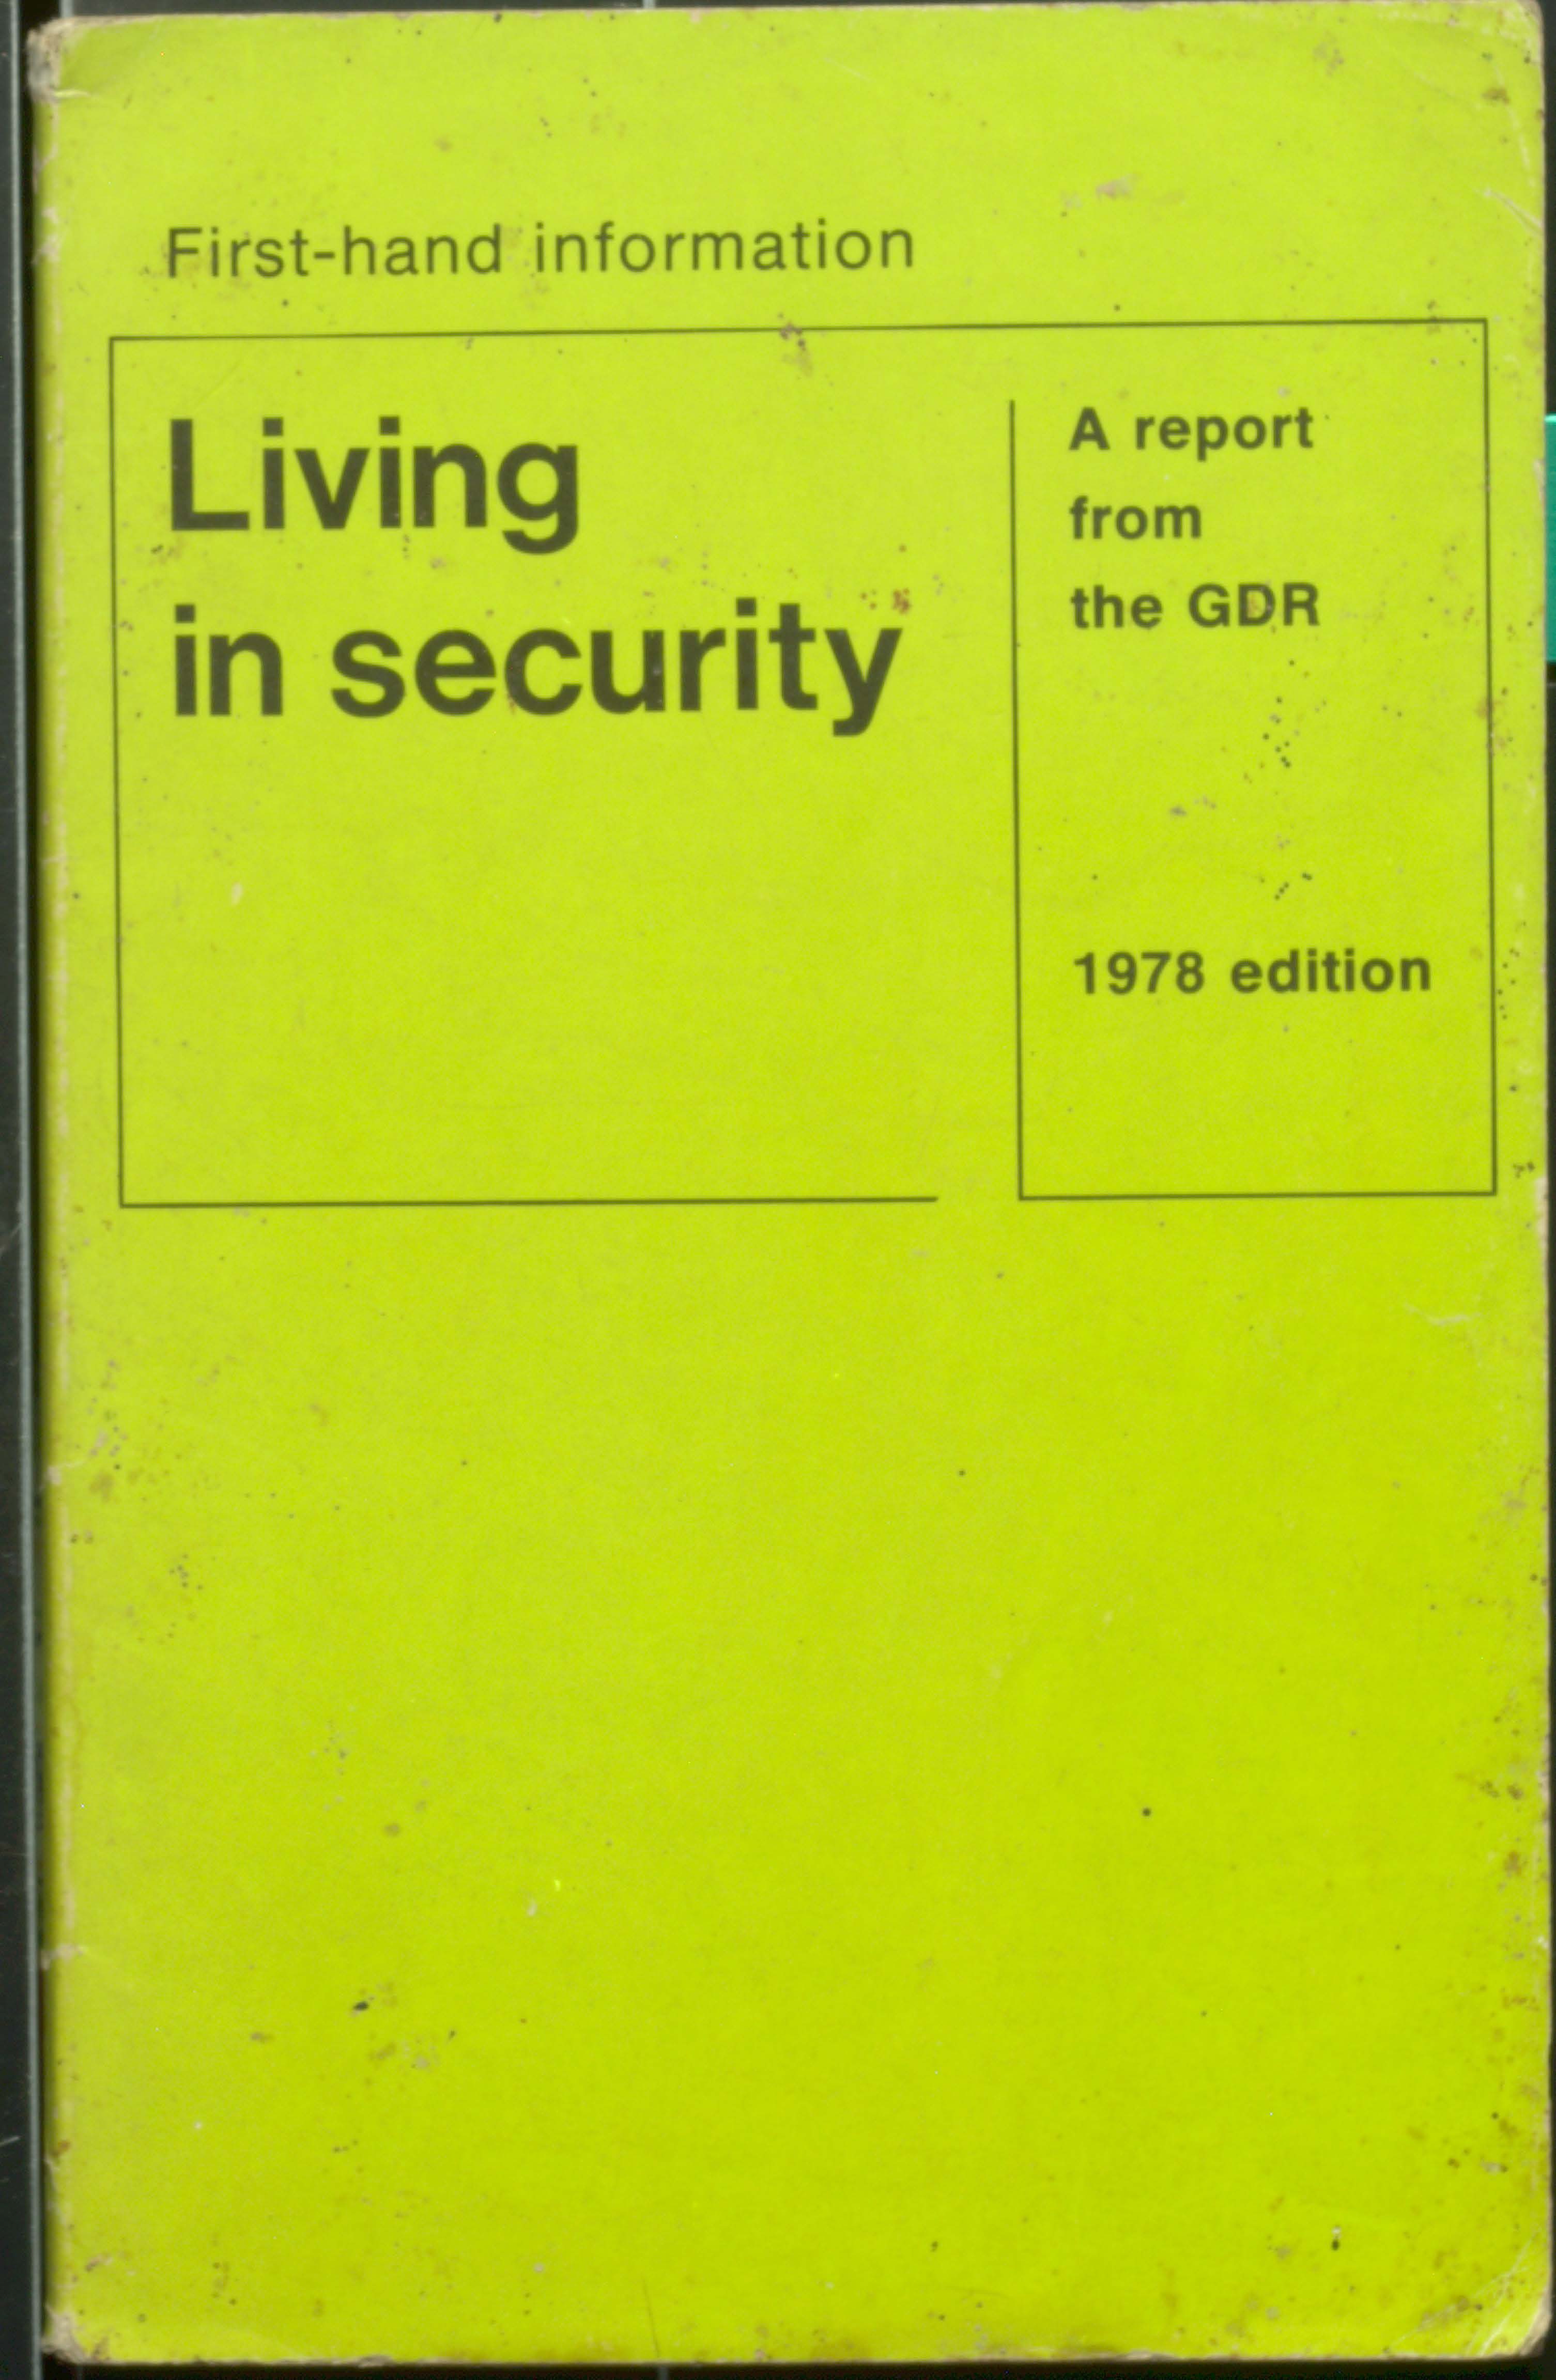 Living in security a report from the GDR 1978 edition